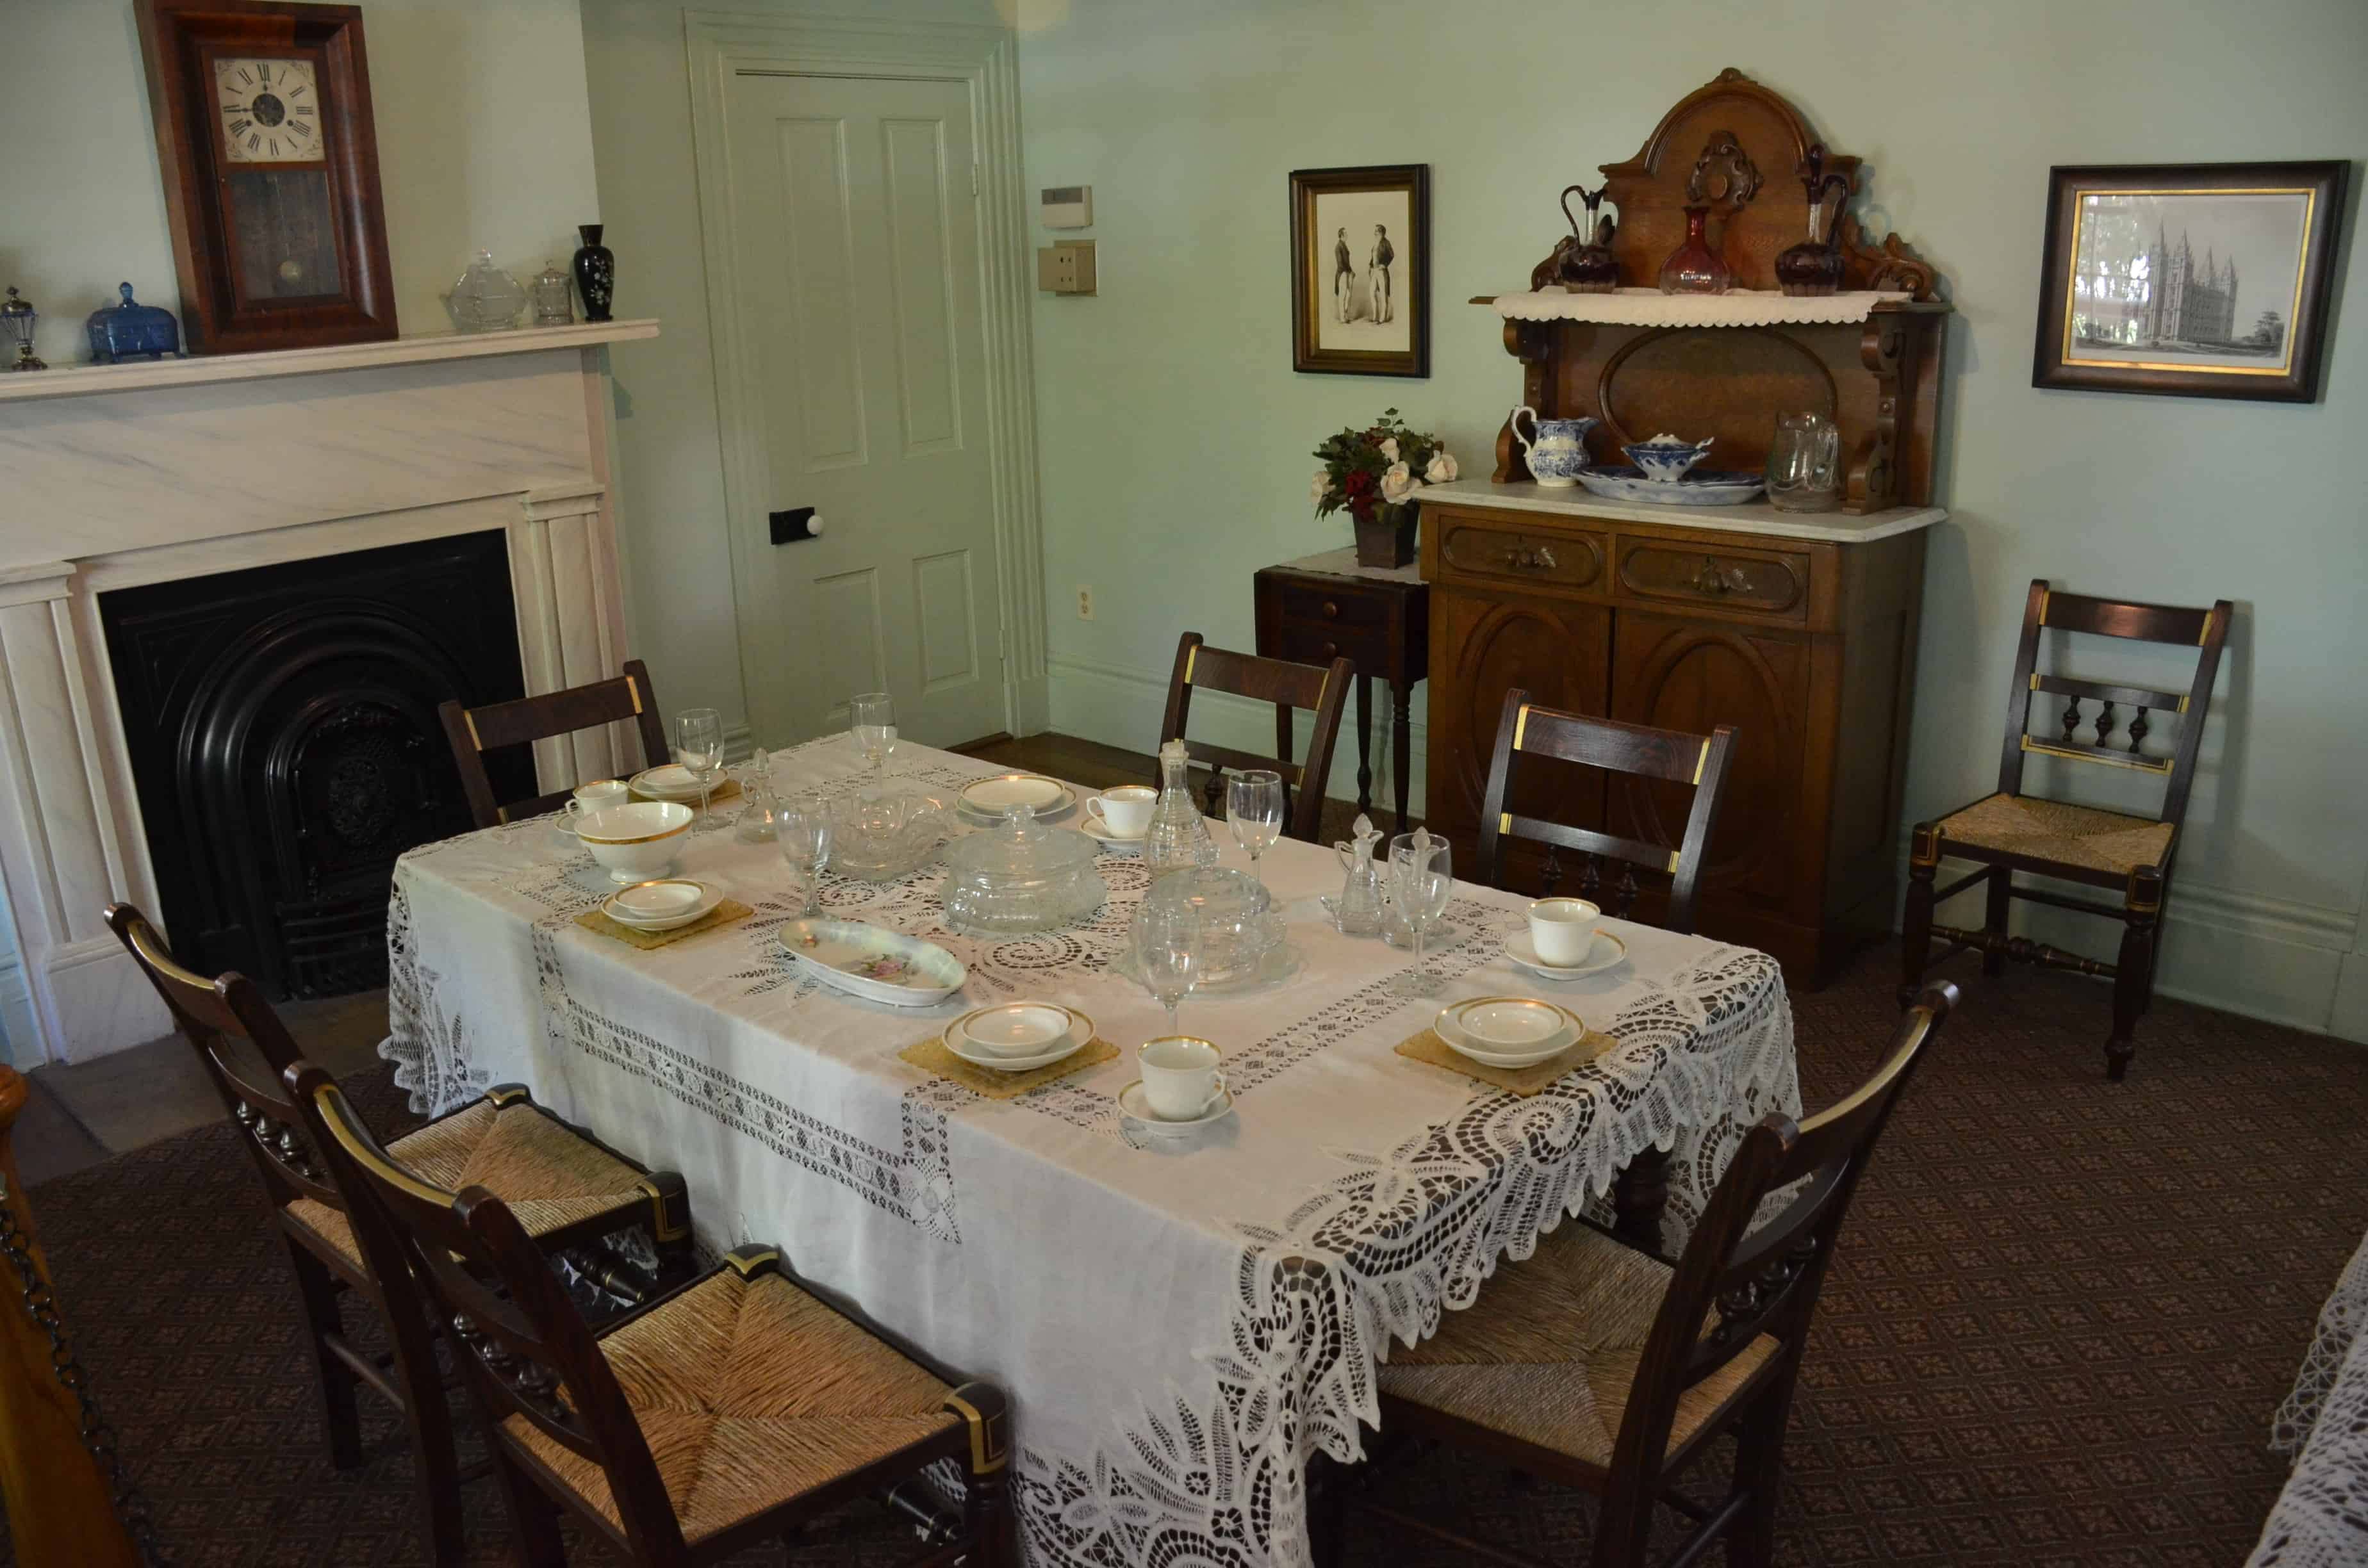 Dining room at the Brigham Young Winter Home in St. George, Utah